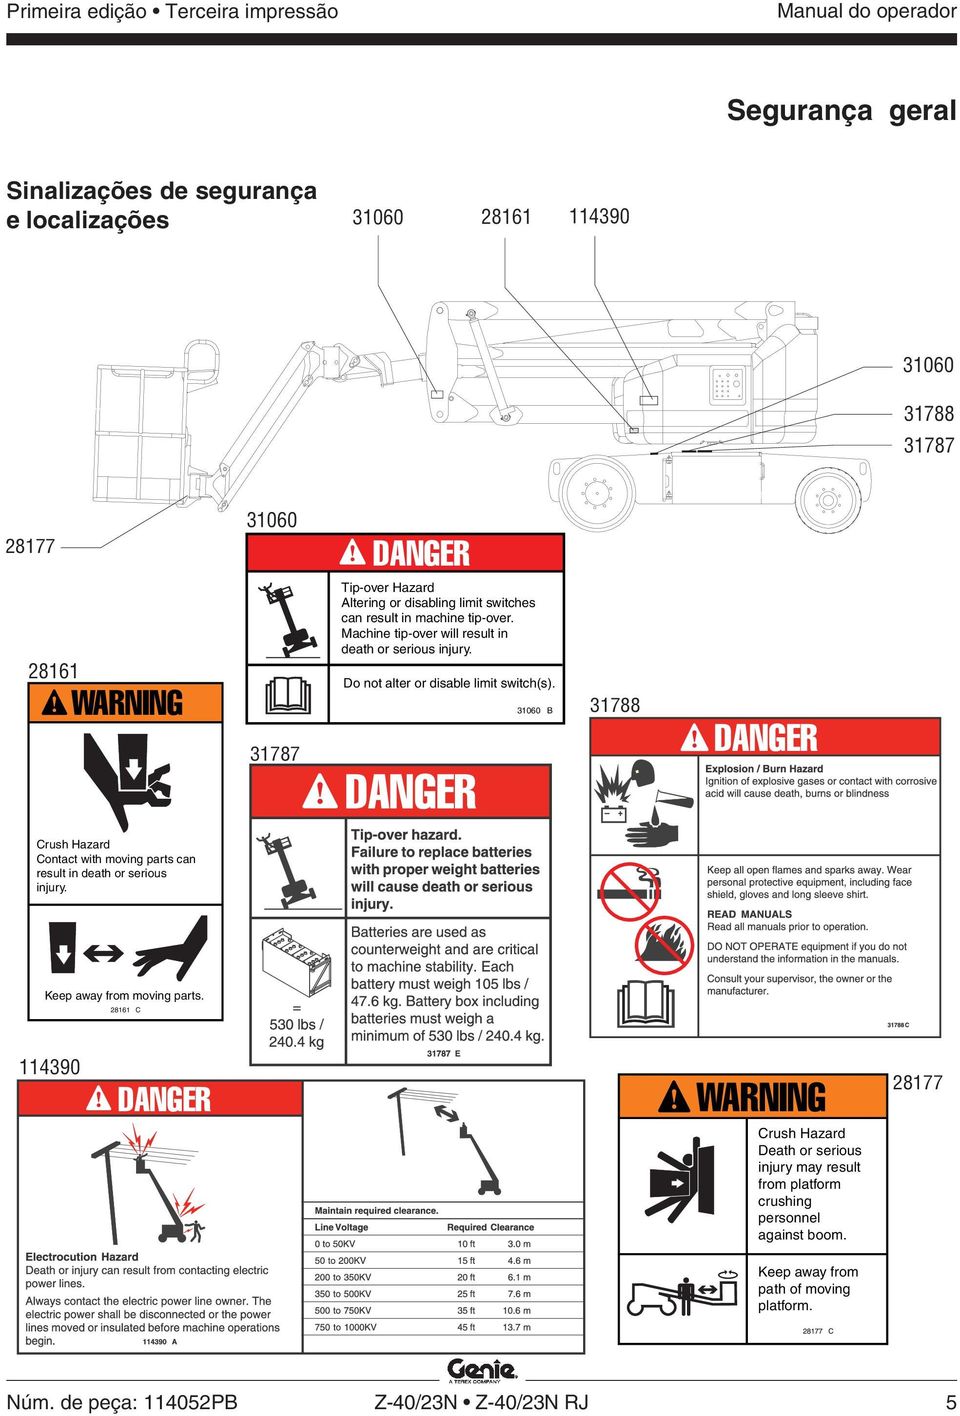 Do not alter or disable limit switch(s). DANGER 31060 B 31788 DANGER Crush Hazard Contact with moving parts can result in death or serious injury. Keep away from moving parts.